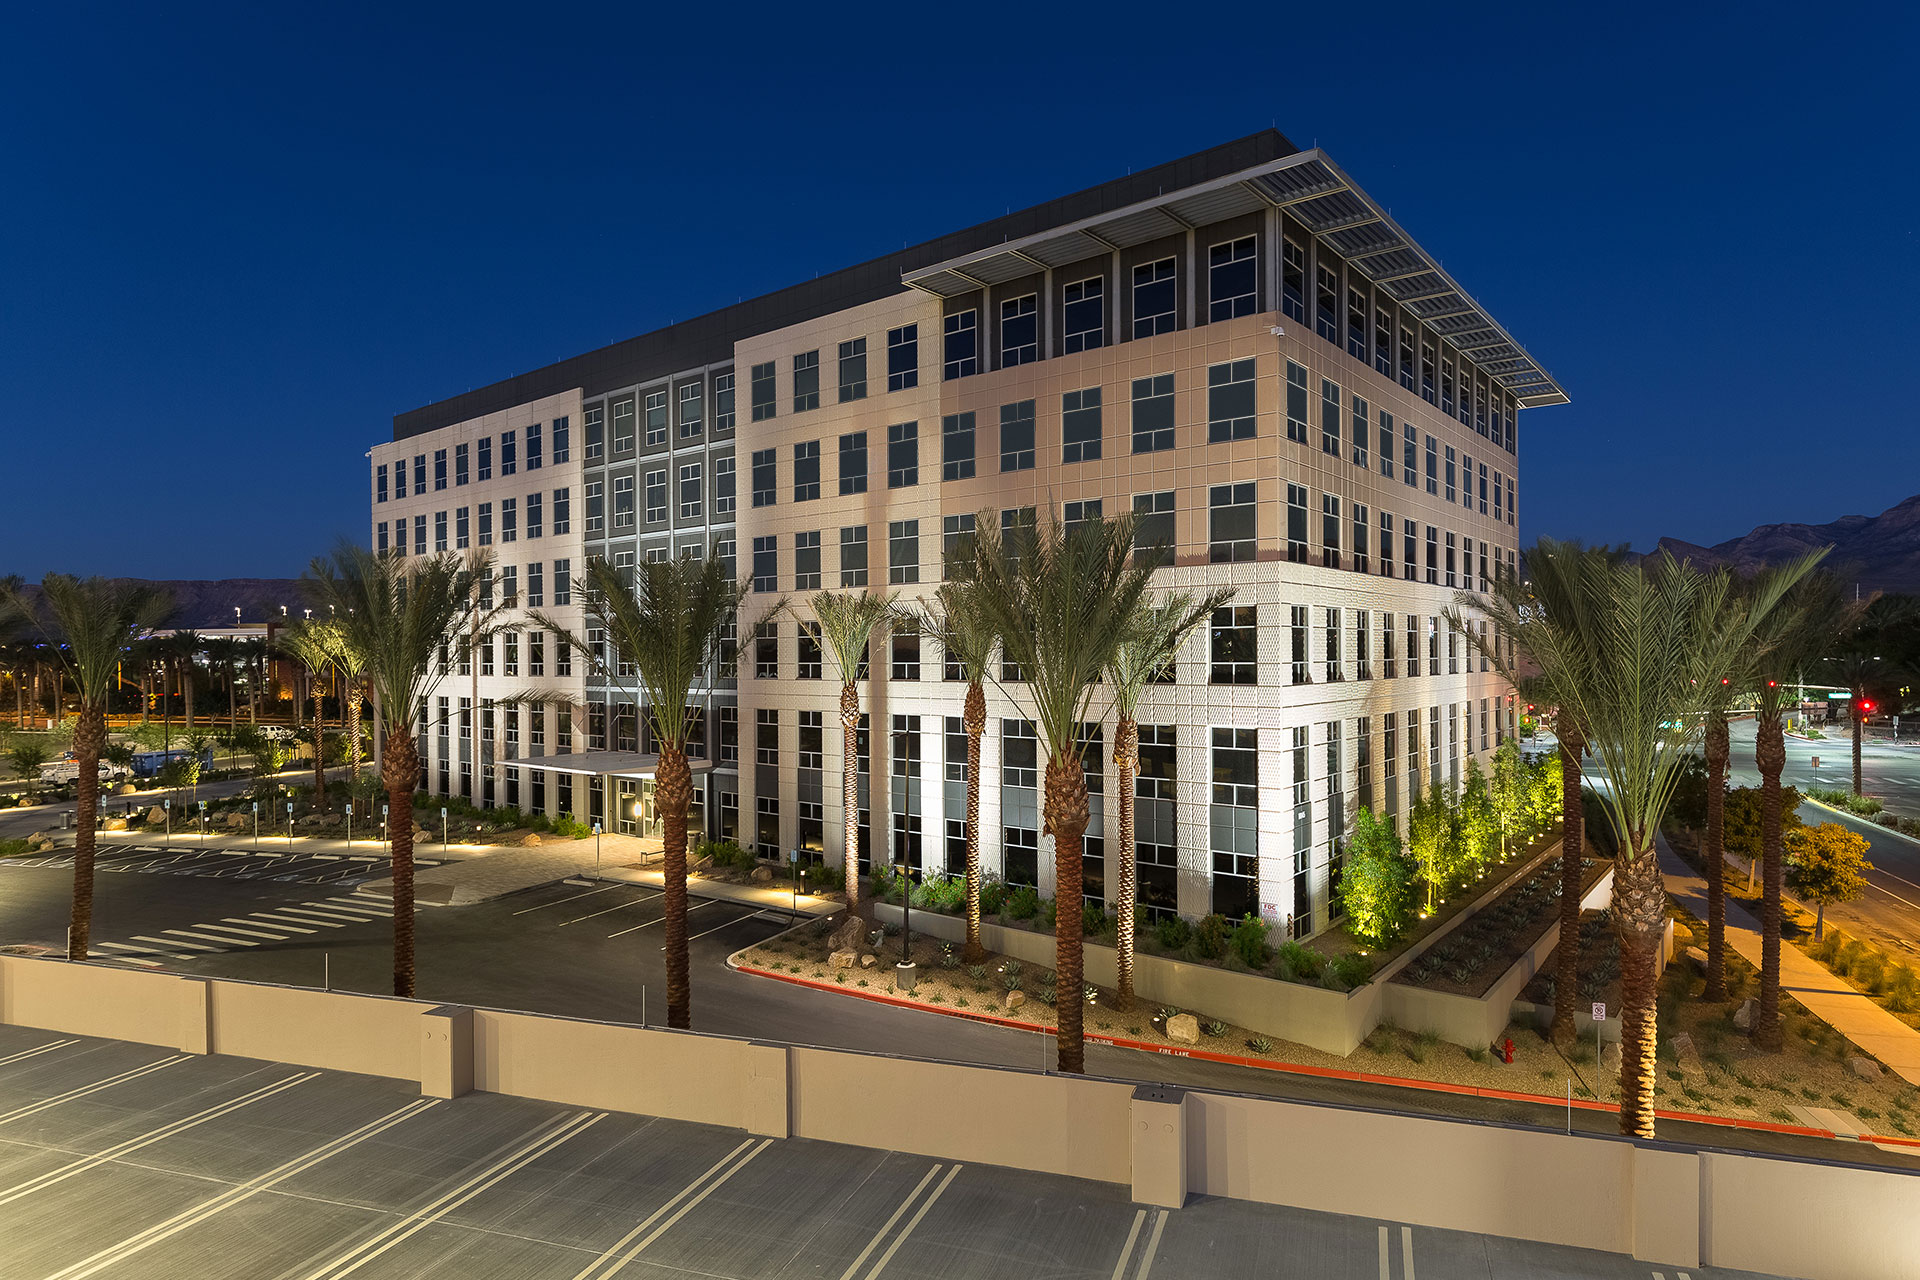 A six-story office building at twilight with beige and grey exterior, with palm trees and desert lanscaping and the top of a parking structure in the foreground with rich blue skies and mountains the background.